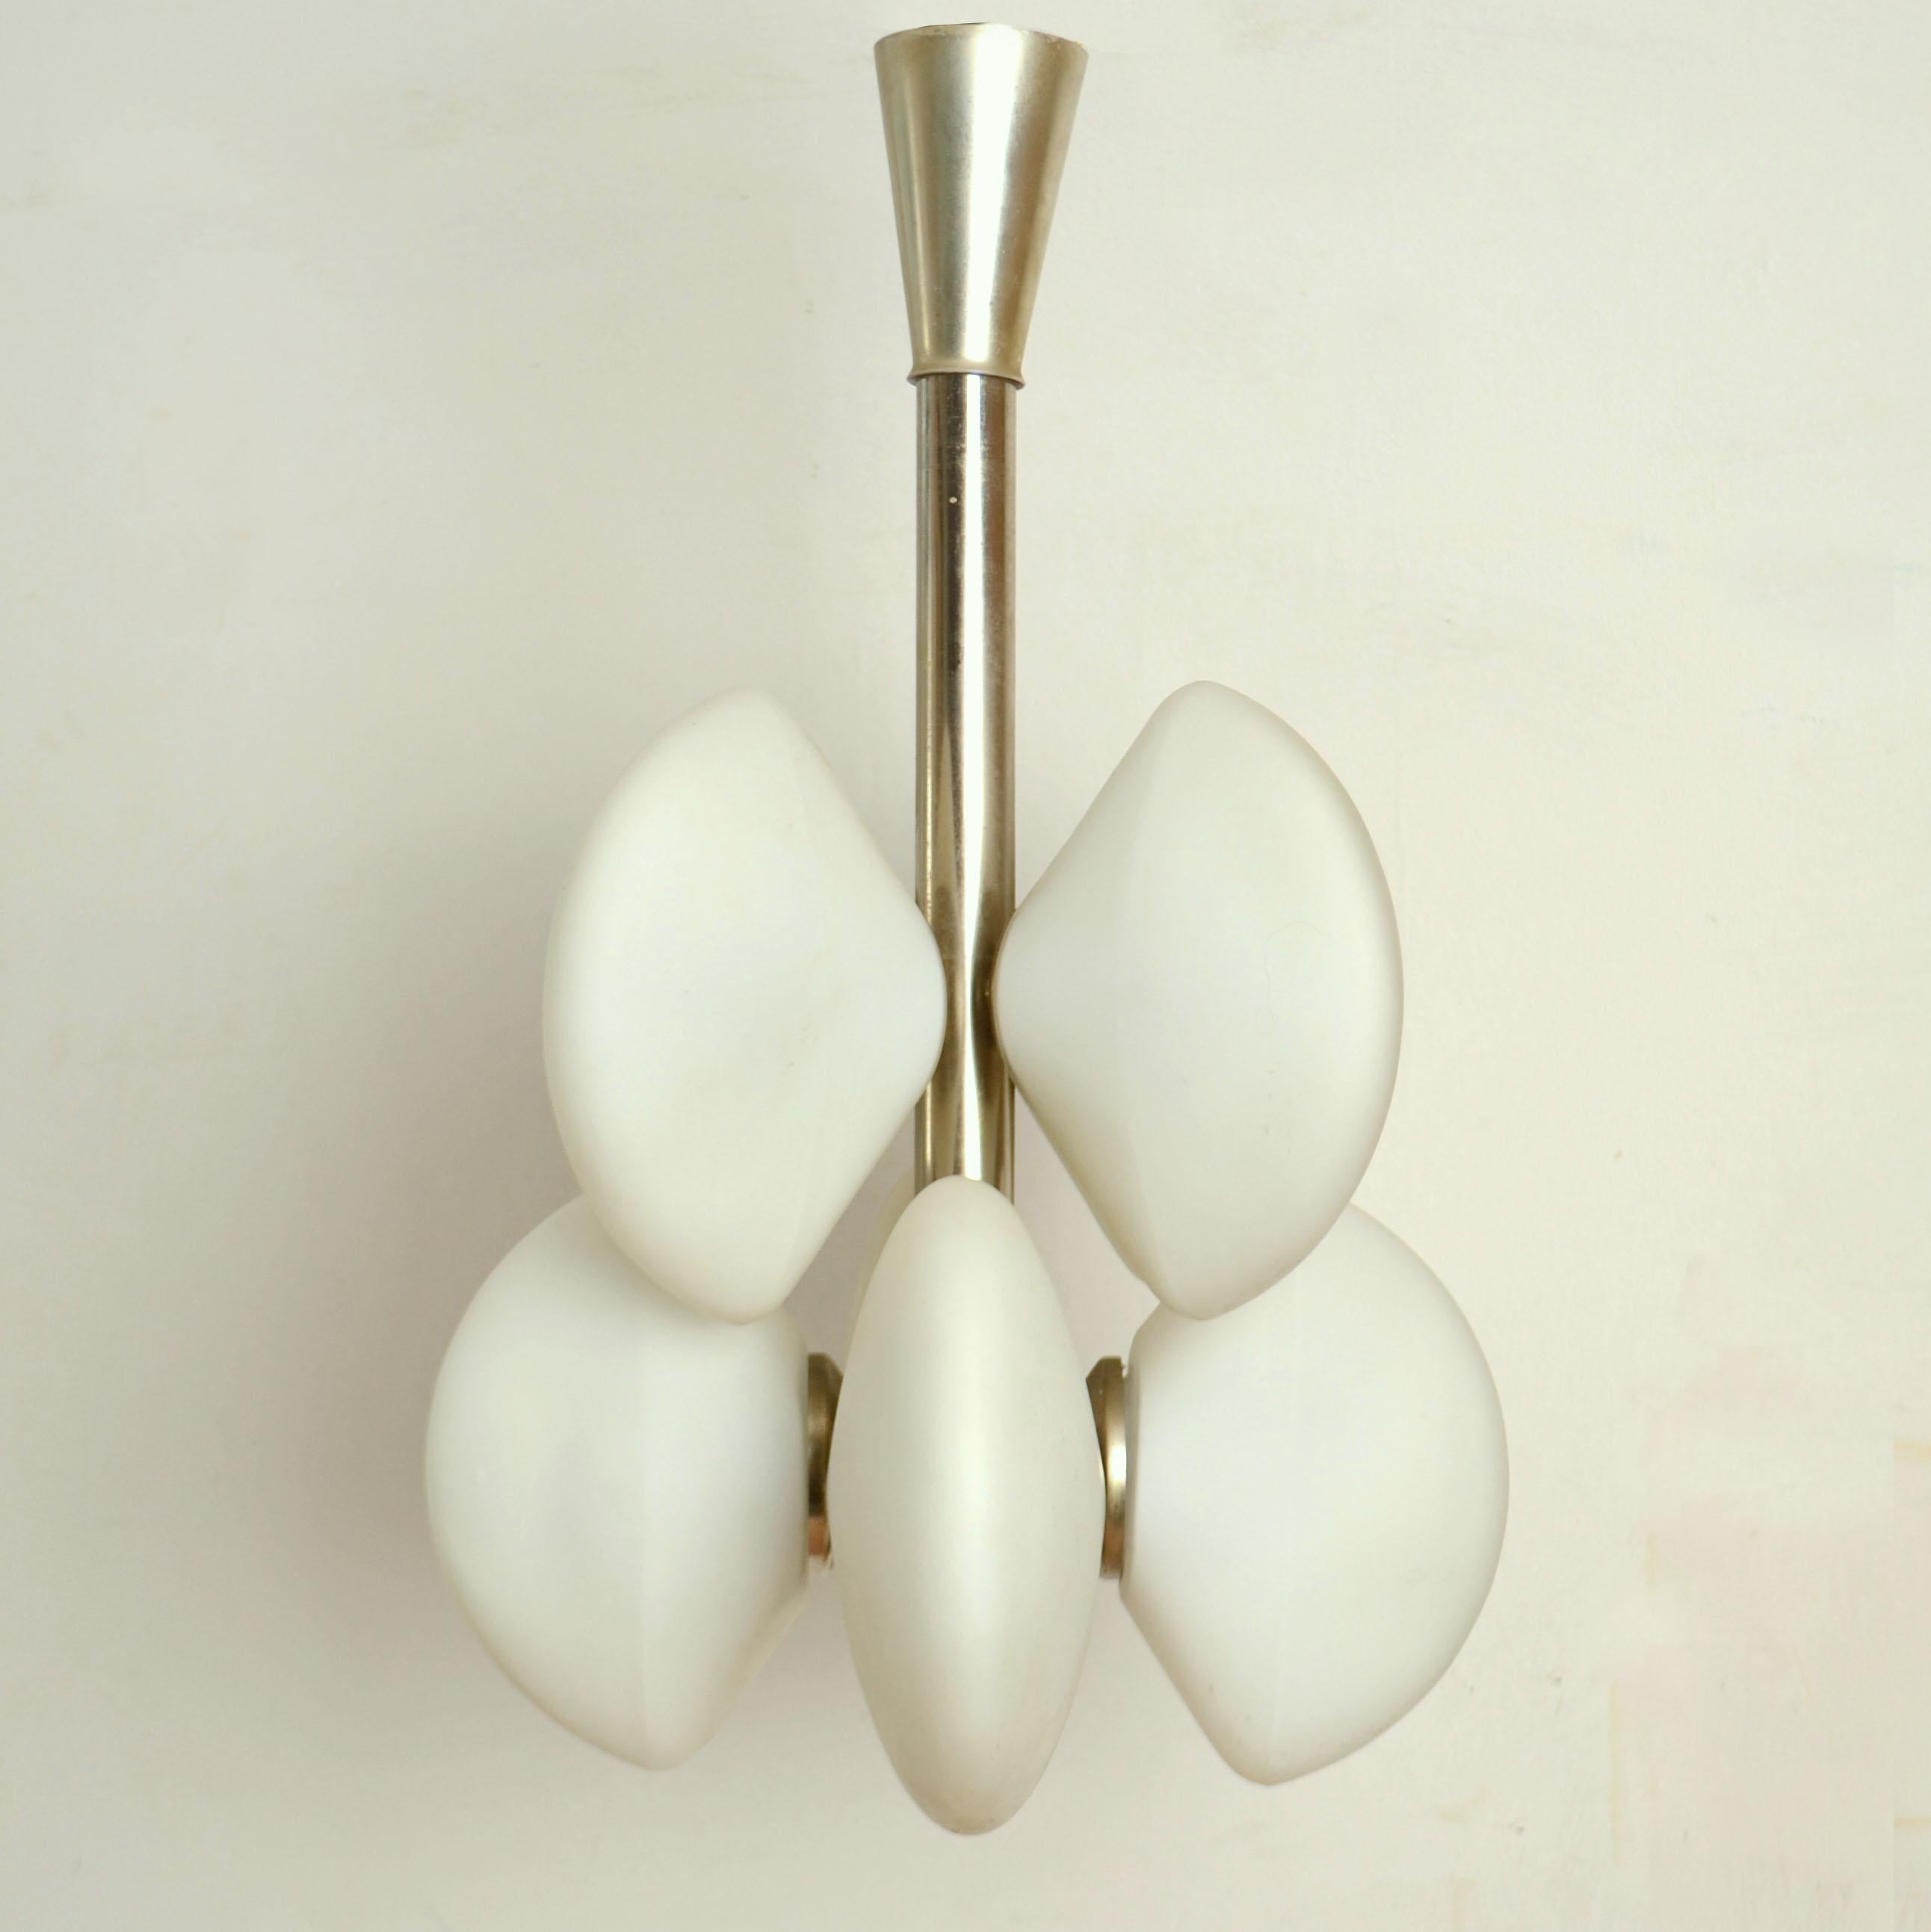 Midcentury Sputnik Pendant with Opalescent Shades and Nickel Frame In Excellent Condition For Sale In London, GB